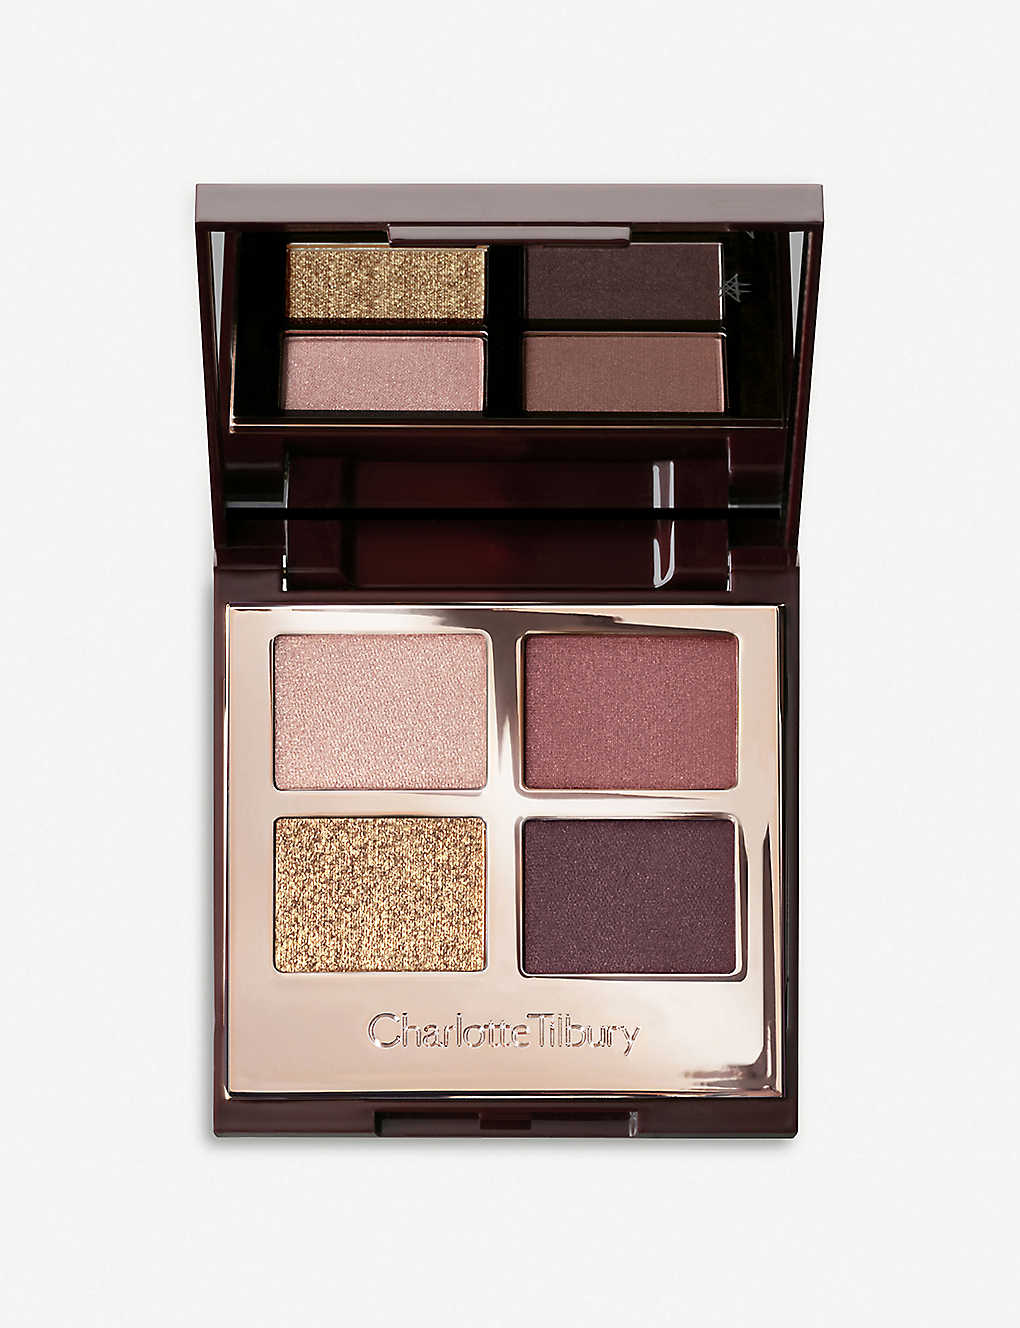 Charlotte Tilbury The Vintage Vamp Iconic Colour-coded Eyeshadow Palette